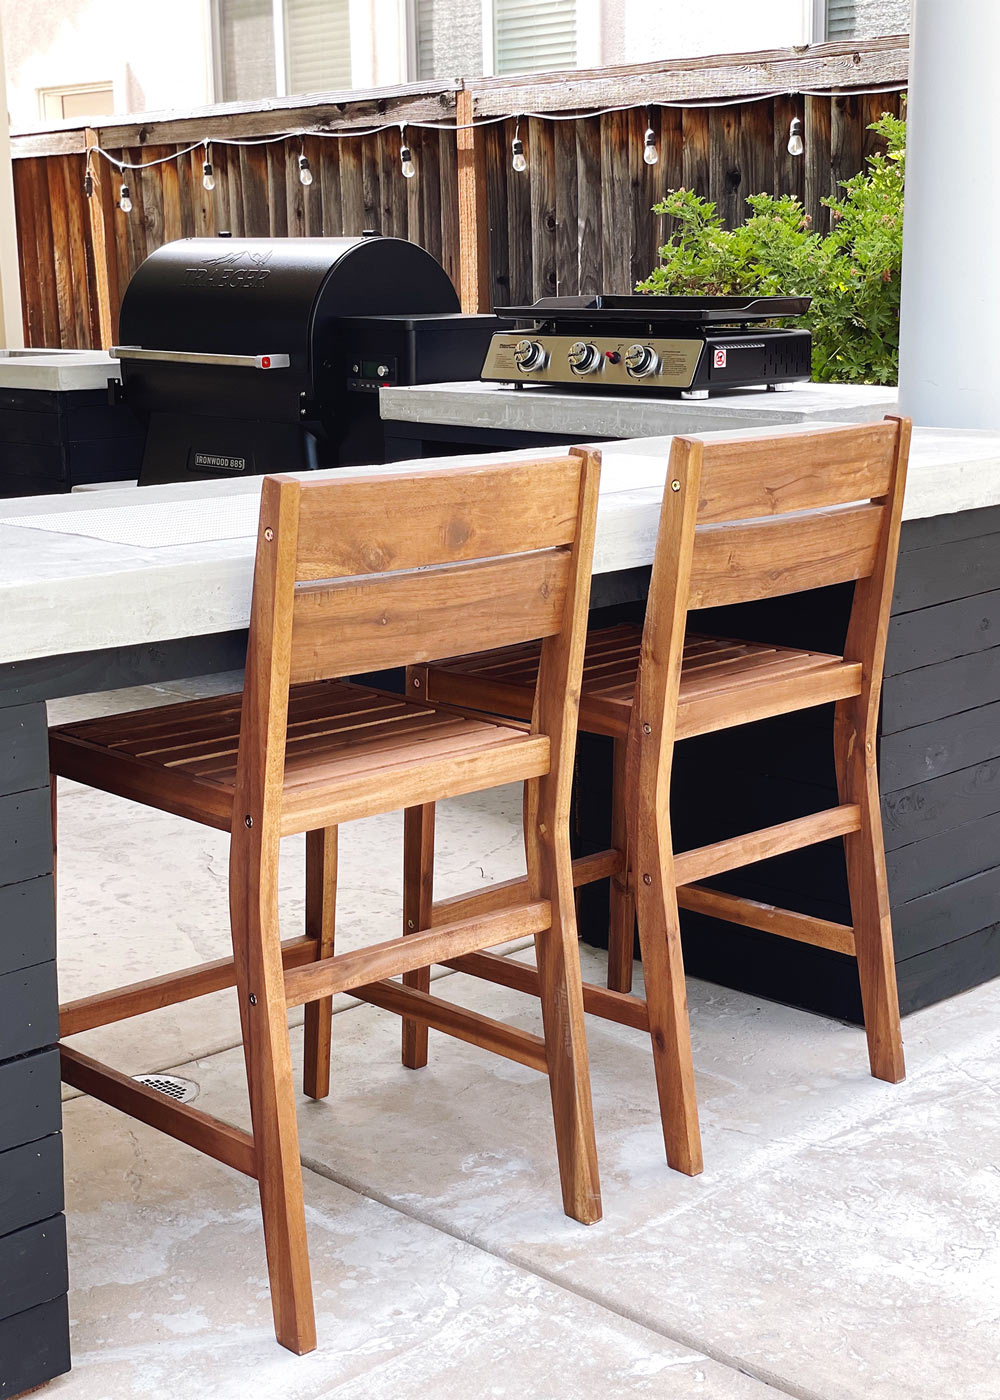 Two brown wooden chairs placed under a DIY countertop bar area